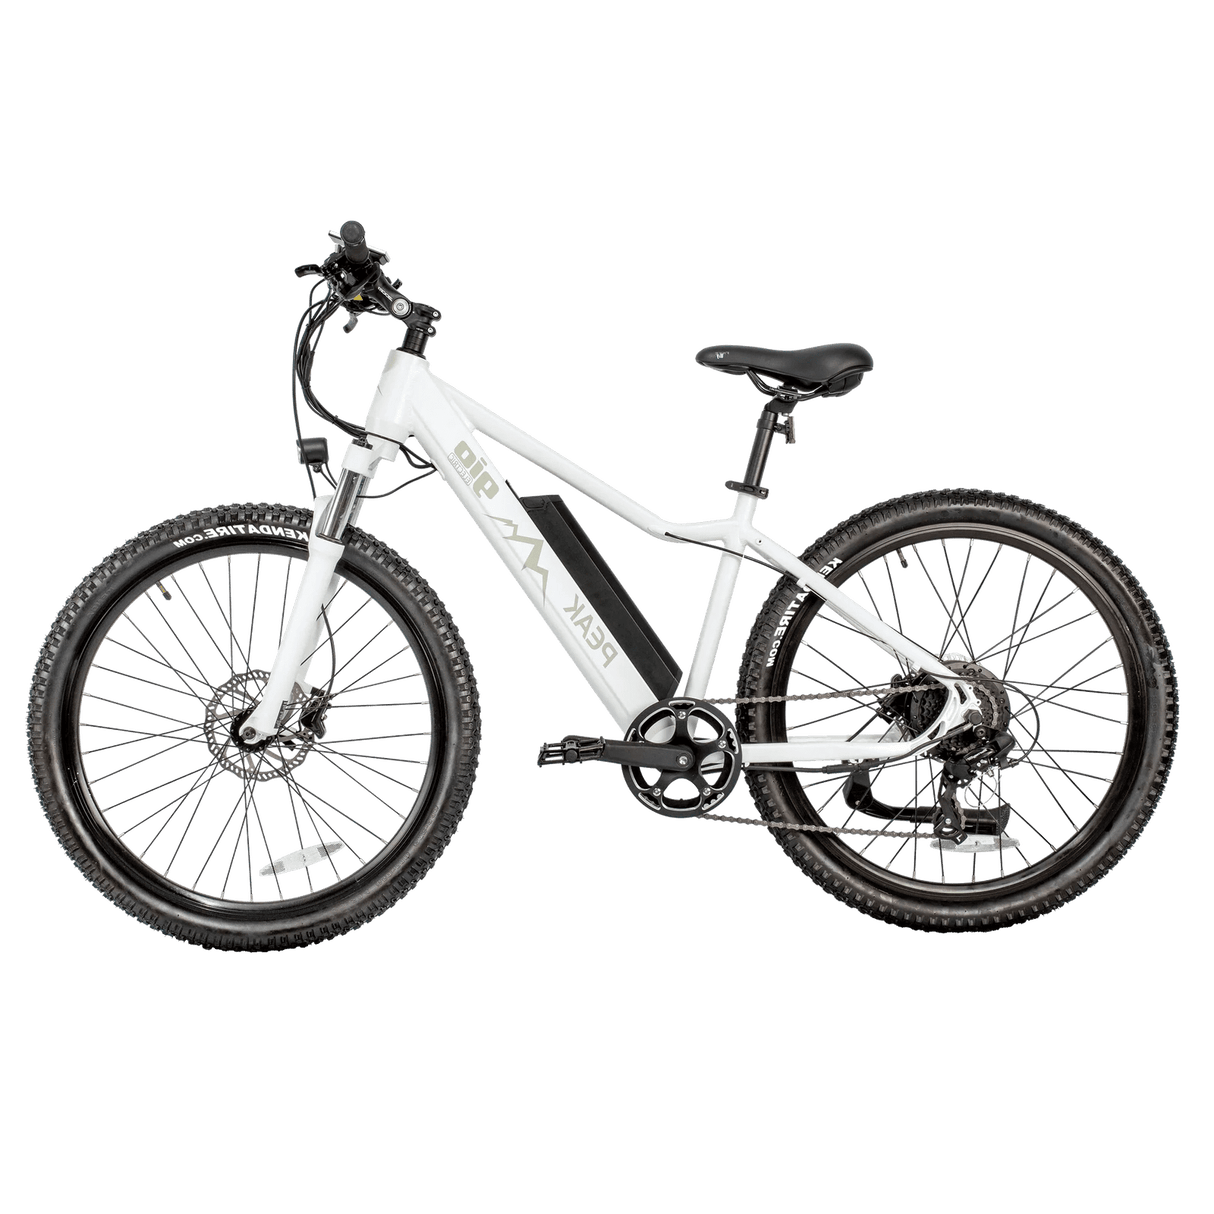 GIO PEAK Electric Bike with Torque Sensor, CPSC 1512 Test Approved